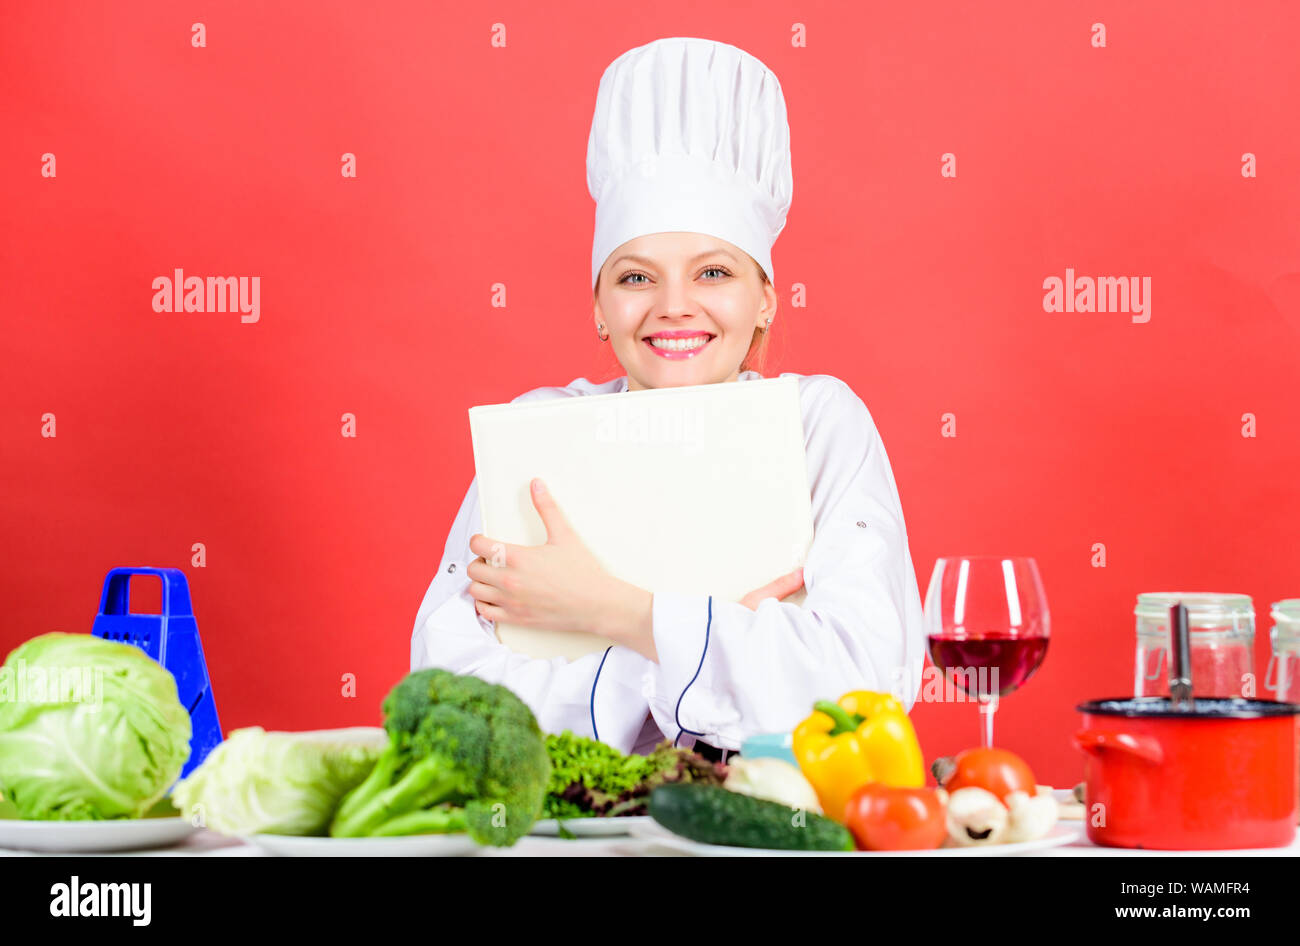 Tips and advice. Preparing food. Delicious and gourmet. Cooking food as ...